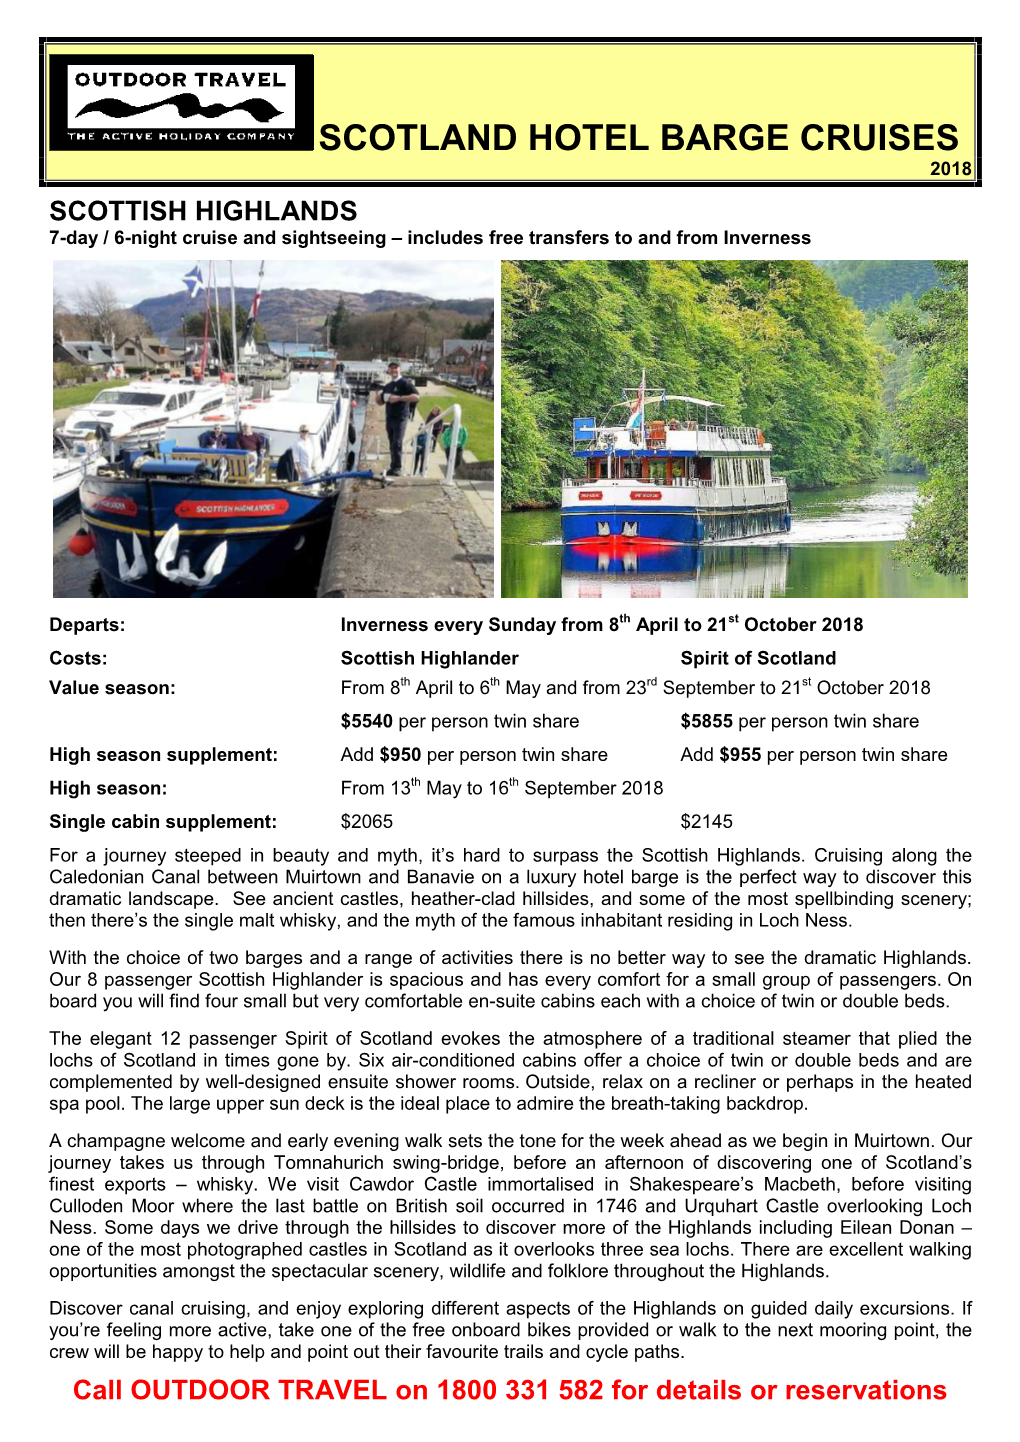 SCOTLAND HOTEL BARGE CRUISES 2018 SCOTTISH HIGHLANDS 7-Day / 6-Night Cruise and Sightseeing – Includes Free Transfers to and from Inverness